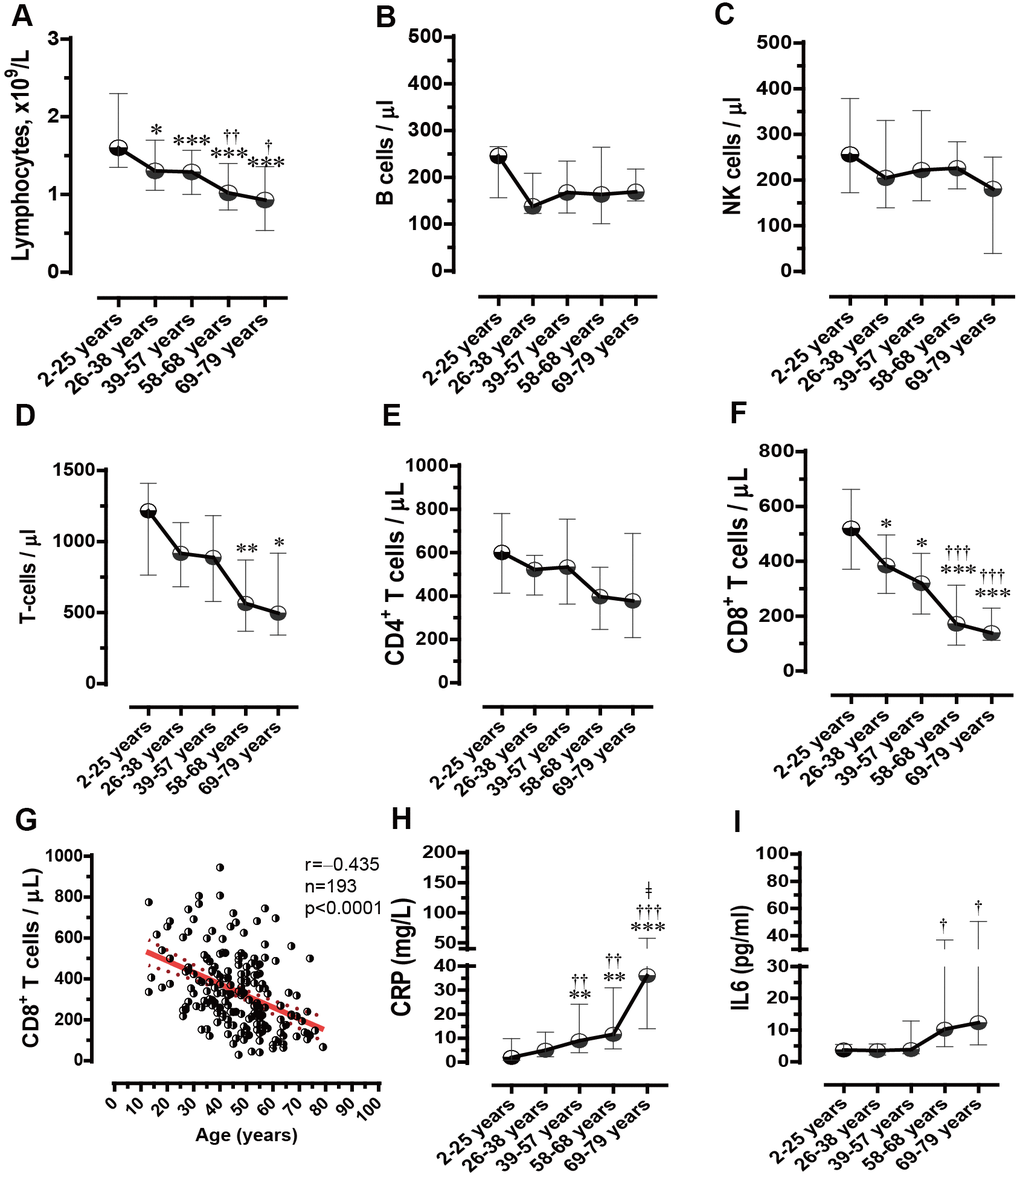 Blood lymphocyte and subset count, plasma C-reactive protein (CRP) and interleukin 6 (IL-6) levels in COVID-19 patients with different age categories. (A) Lymphocyte counts linearly decreased in the five age groups. (B) B cells did not significantly differ among the five age groups. (C) Natural killer (NK) cells did not differ among the five age groups. (D) Changes in T cell counts in the five age groups. (E) CD4+ T cells did not significantly differ among the five age groups. (F) CD8+ T cell counts linearly decreased in the five age groups. (G) Correlation between age and CD8+ T cell counts. (H) CRP levels linearly increased in the five age groups. (I) Changes in IL-6 levels in the five age groups. *pvs. age group 2–25y; †pvs. age group 26–38y; and ǂ pvs. age group 39–57y.